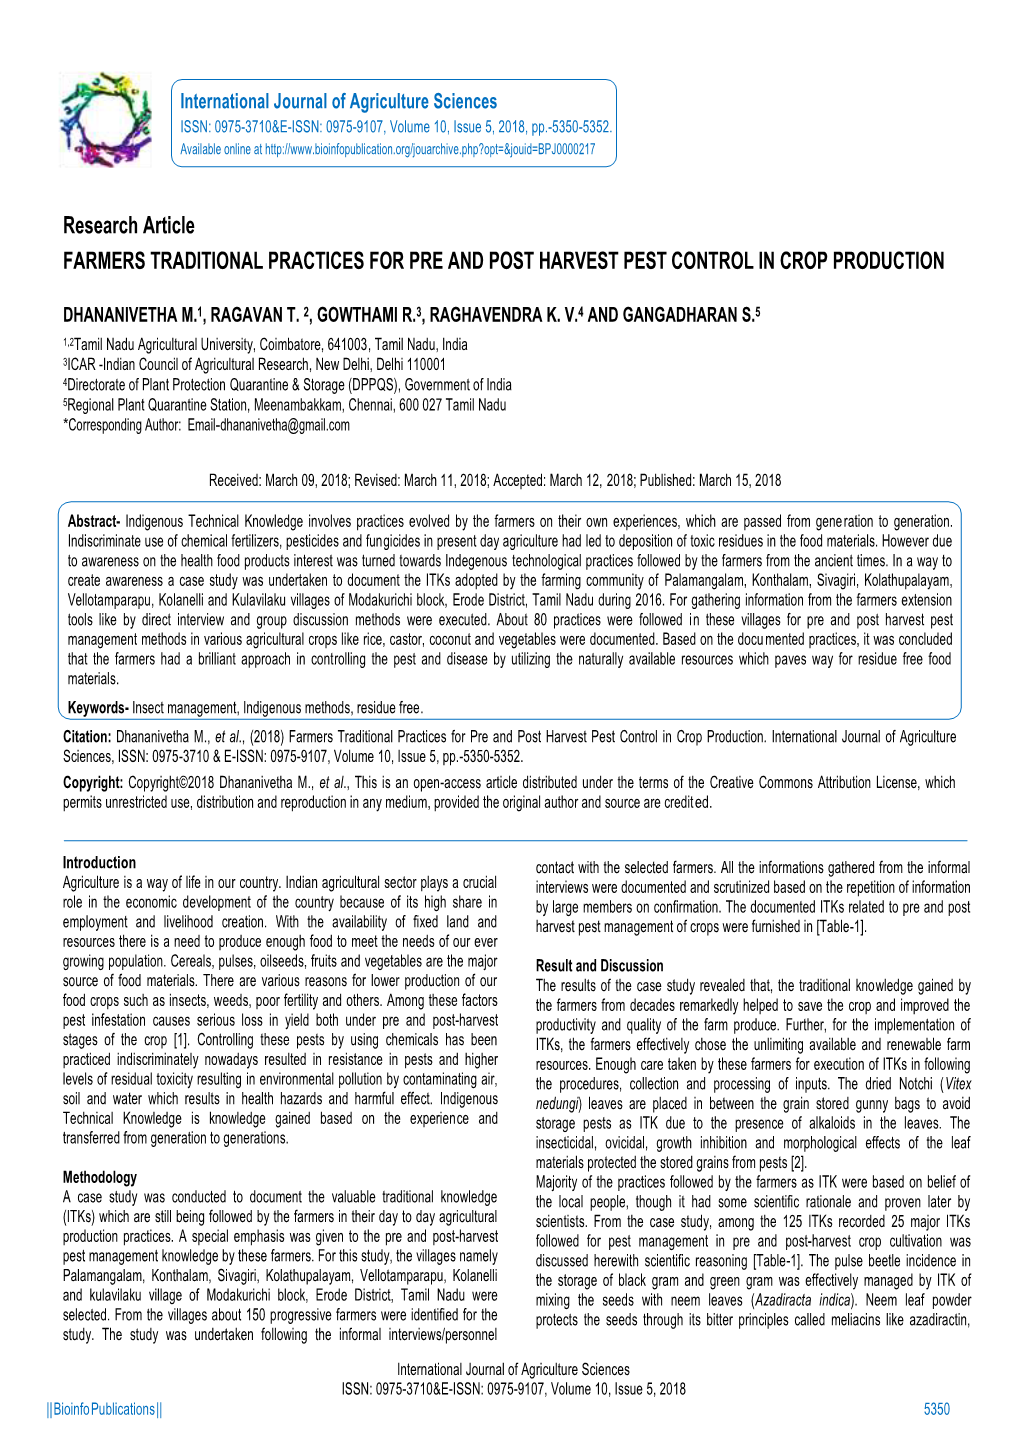 Research Article FARMERS TRADITIONAL PRACTICES for PRE and POST HARVEST PEST CONTROL in CROP PRODUCTION